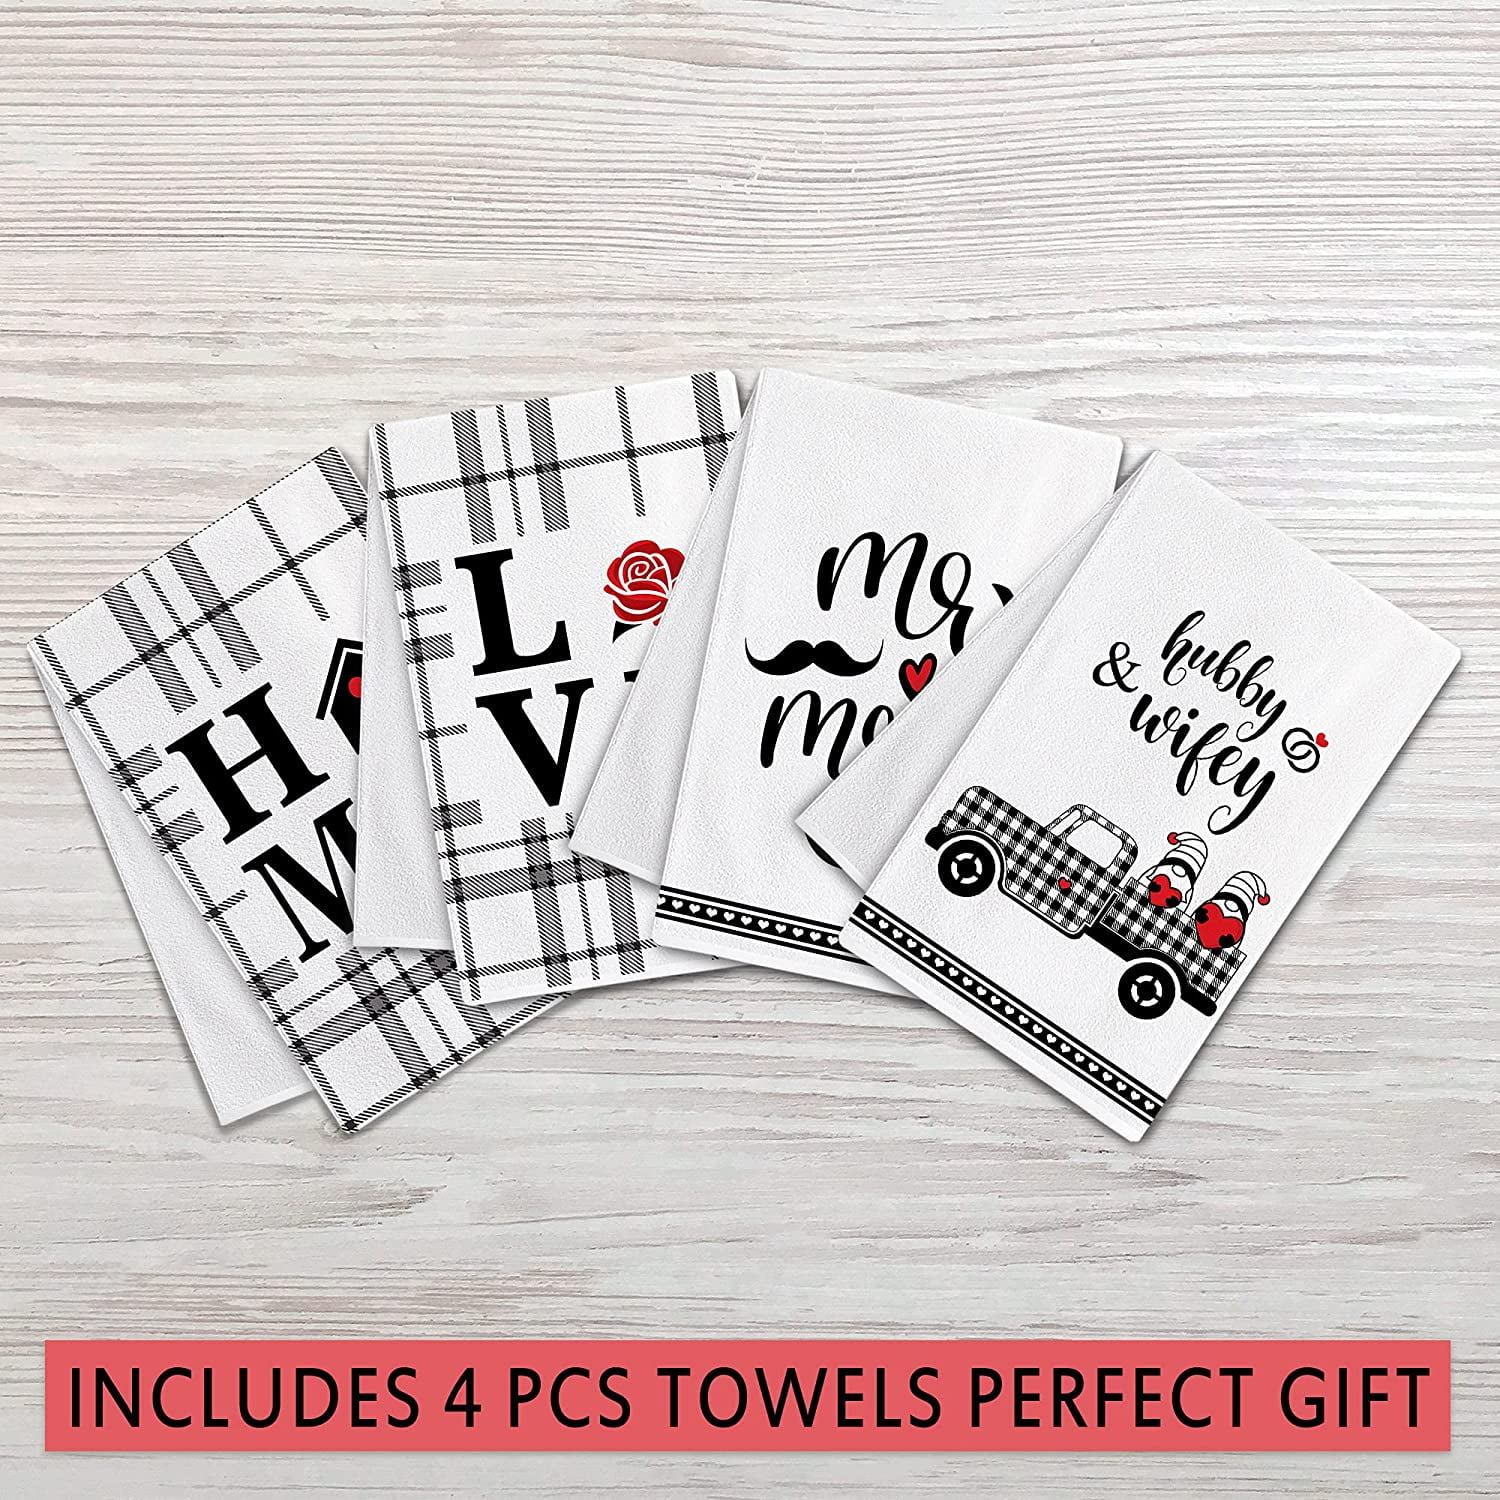  Wedding Gifts For Newlyweds, Just Married Gifts For Couples  Marriage Wedding Novelty Kitchen Dish Towels For Happy Couples, Mr And Mrs  Gifts Dishcloth 24 X 16 Inch Set Of 4